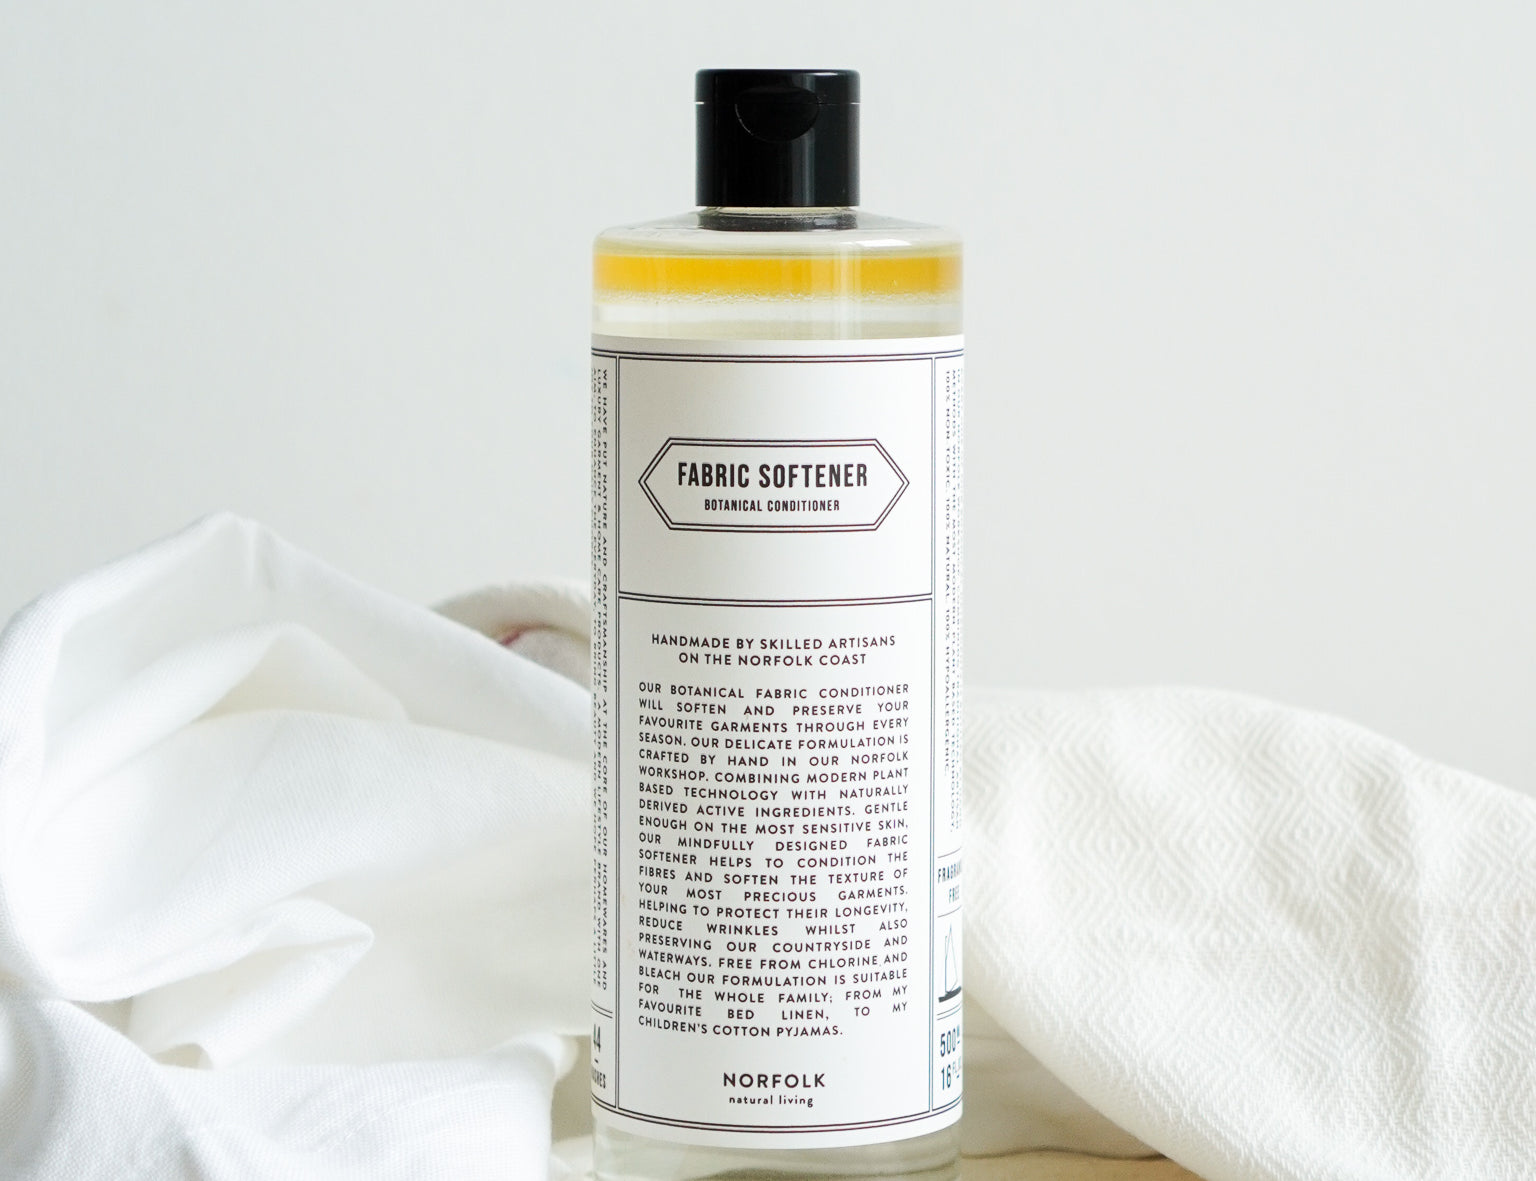 Norfolk Natural Living Fabric Conditioner - Coastal free of chlorine and bleach